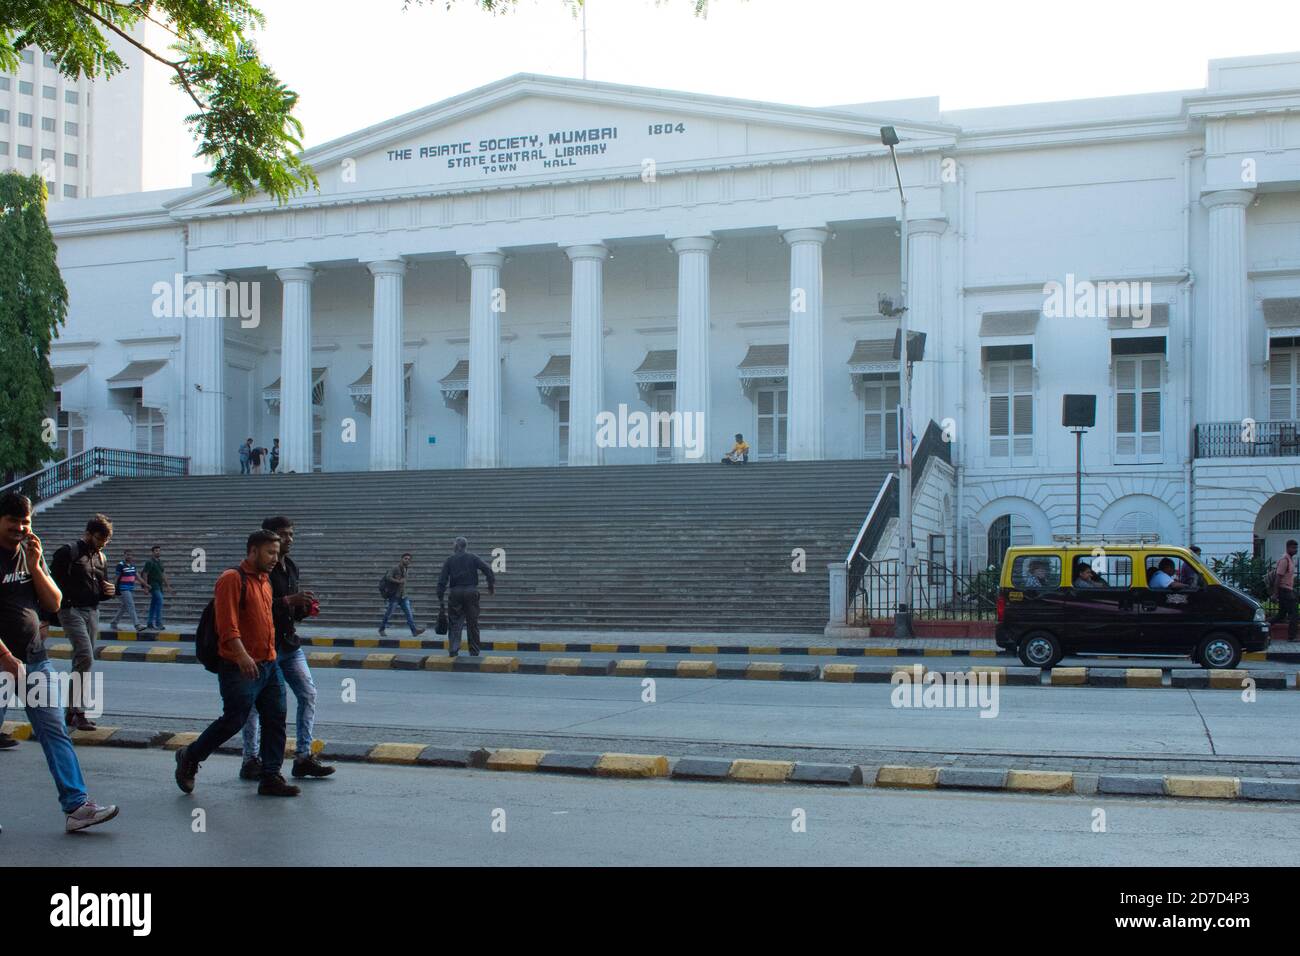 Mumbai, India - February 15, 2019: Morning view of state central library or the town hall in Mumbai, that was built during British colonial period. Stock Photo